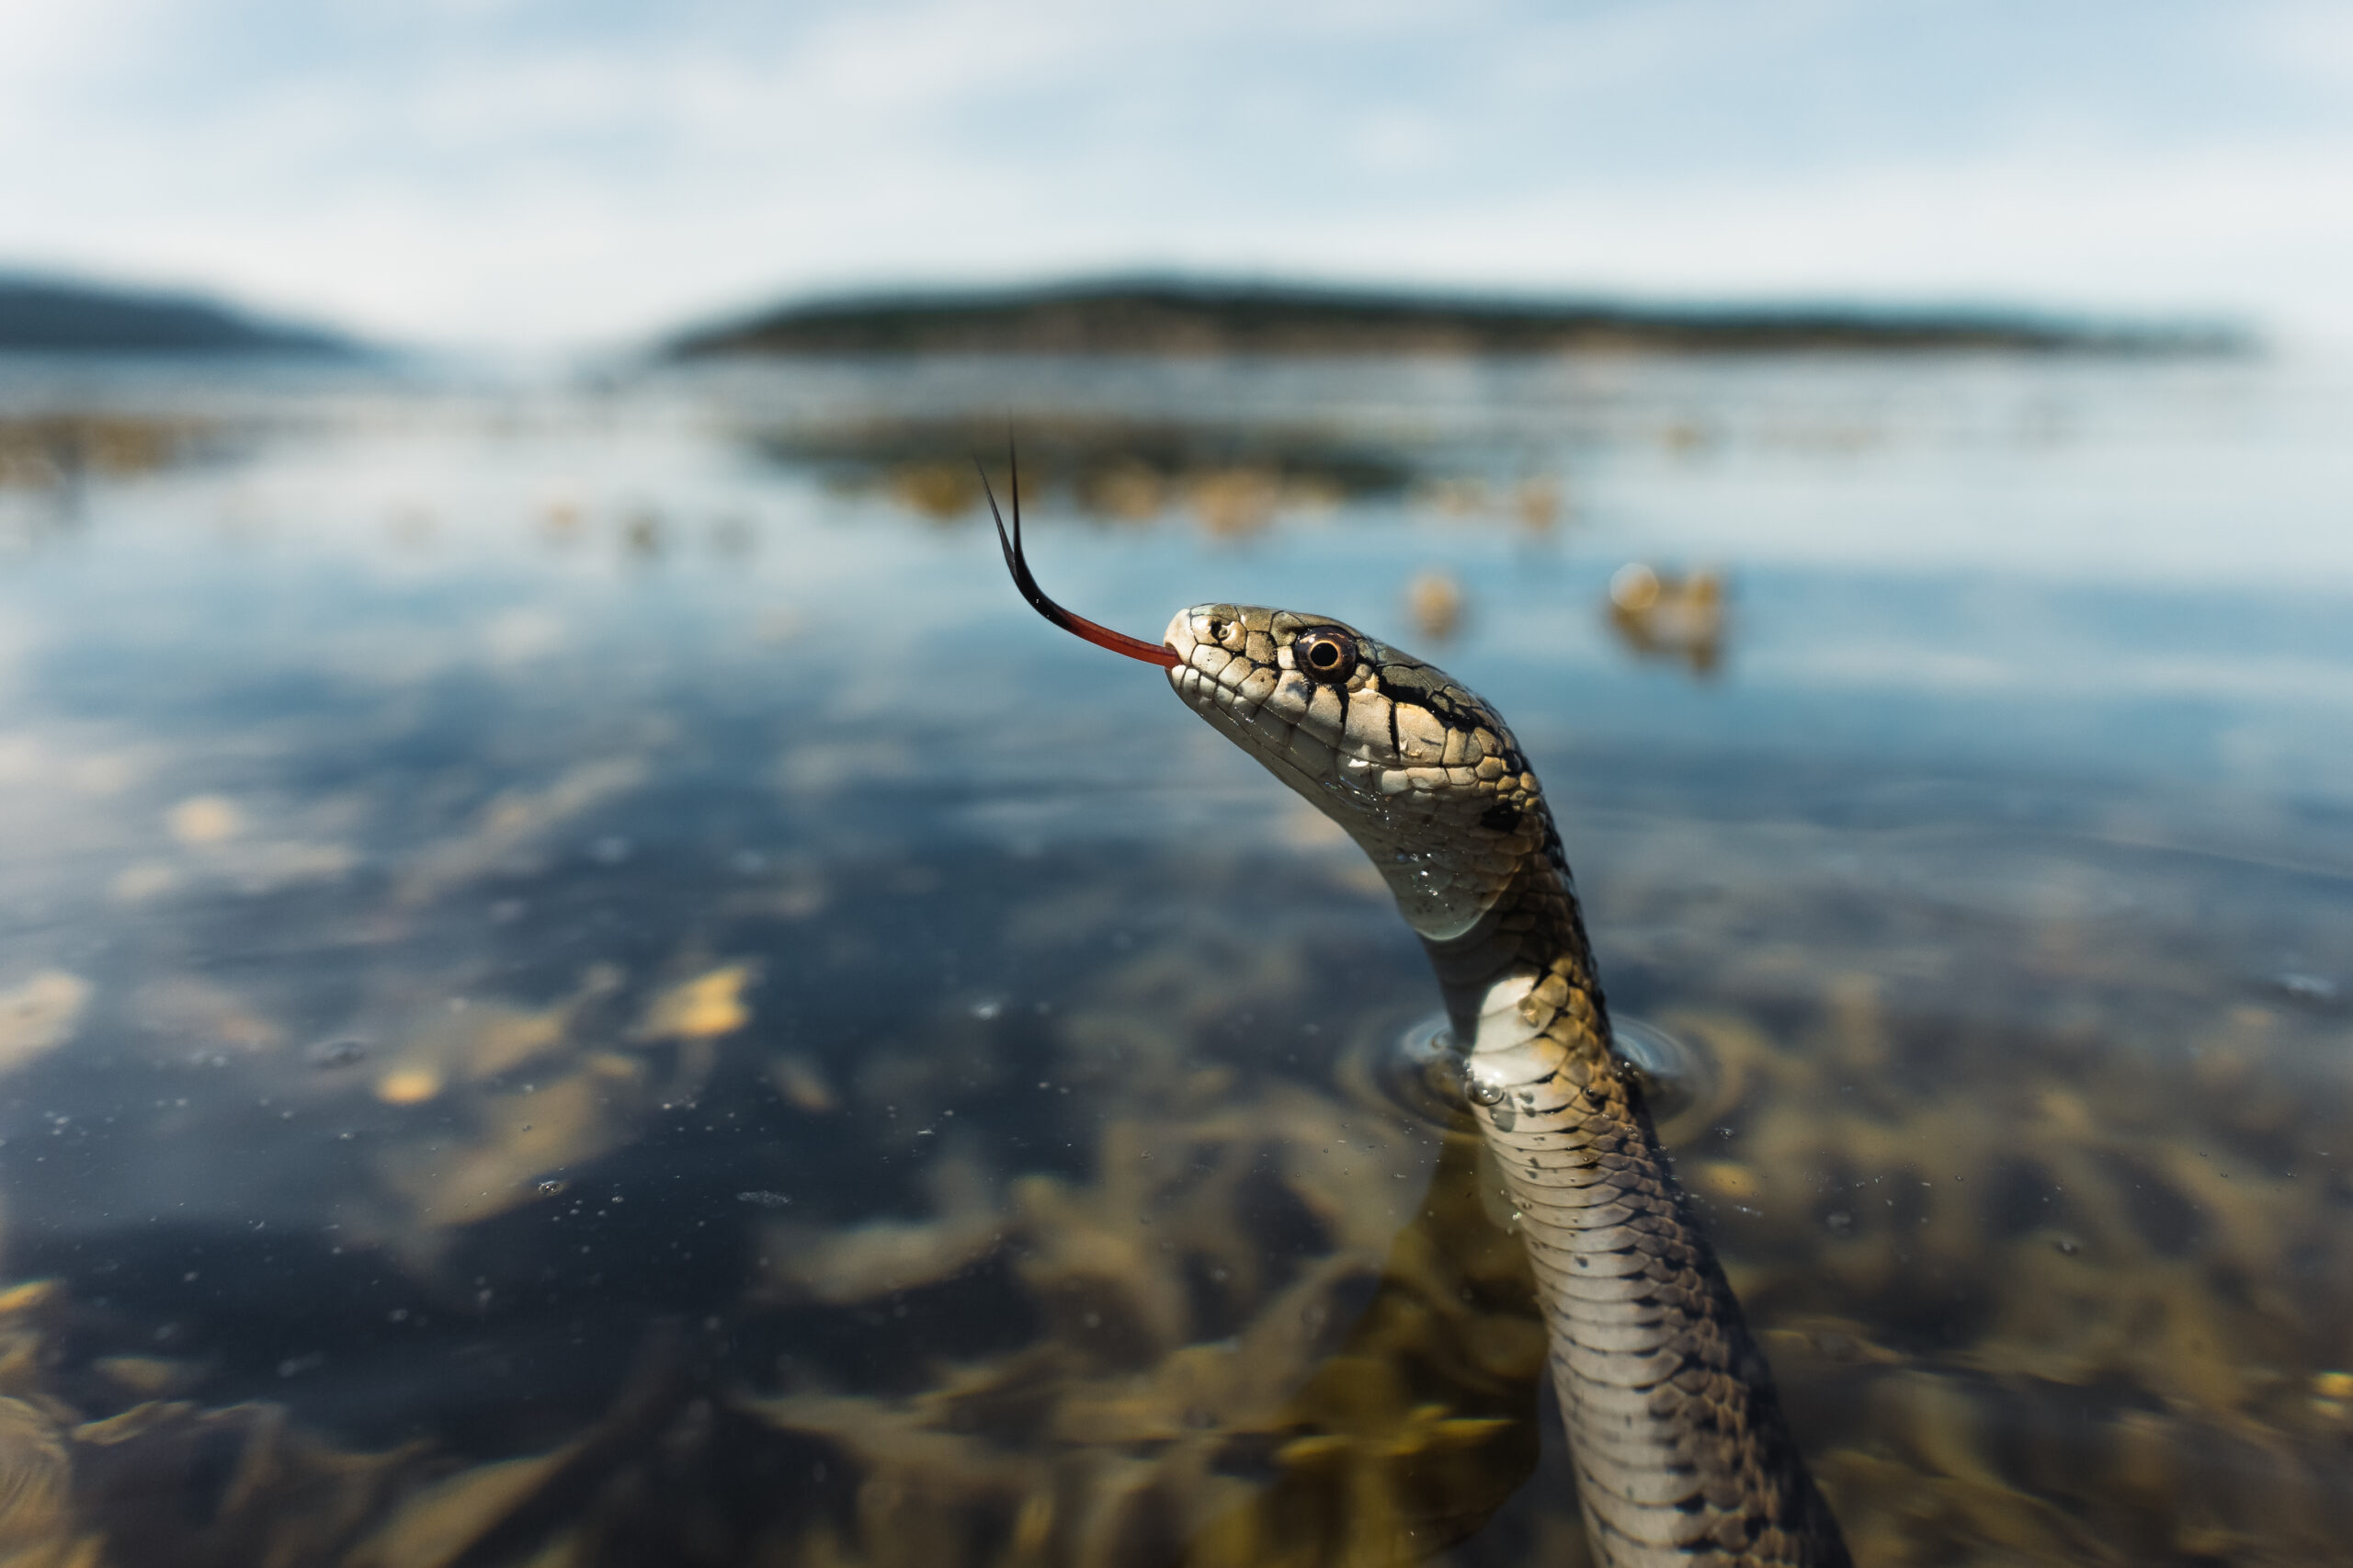 A photo of the Salish serpent snake with its head emerging from the lake and its forked tongue out